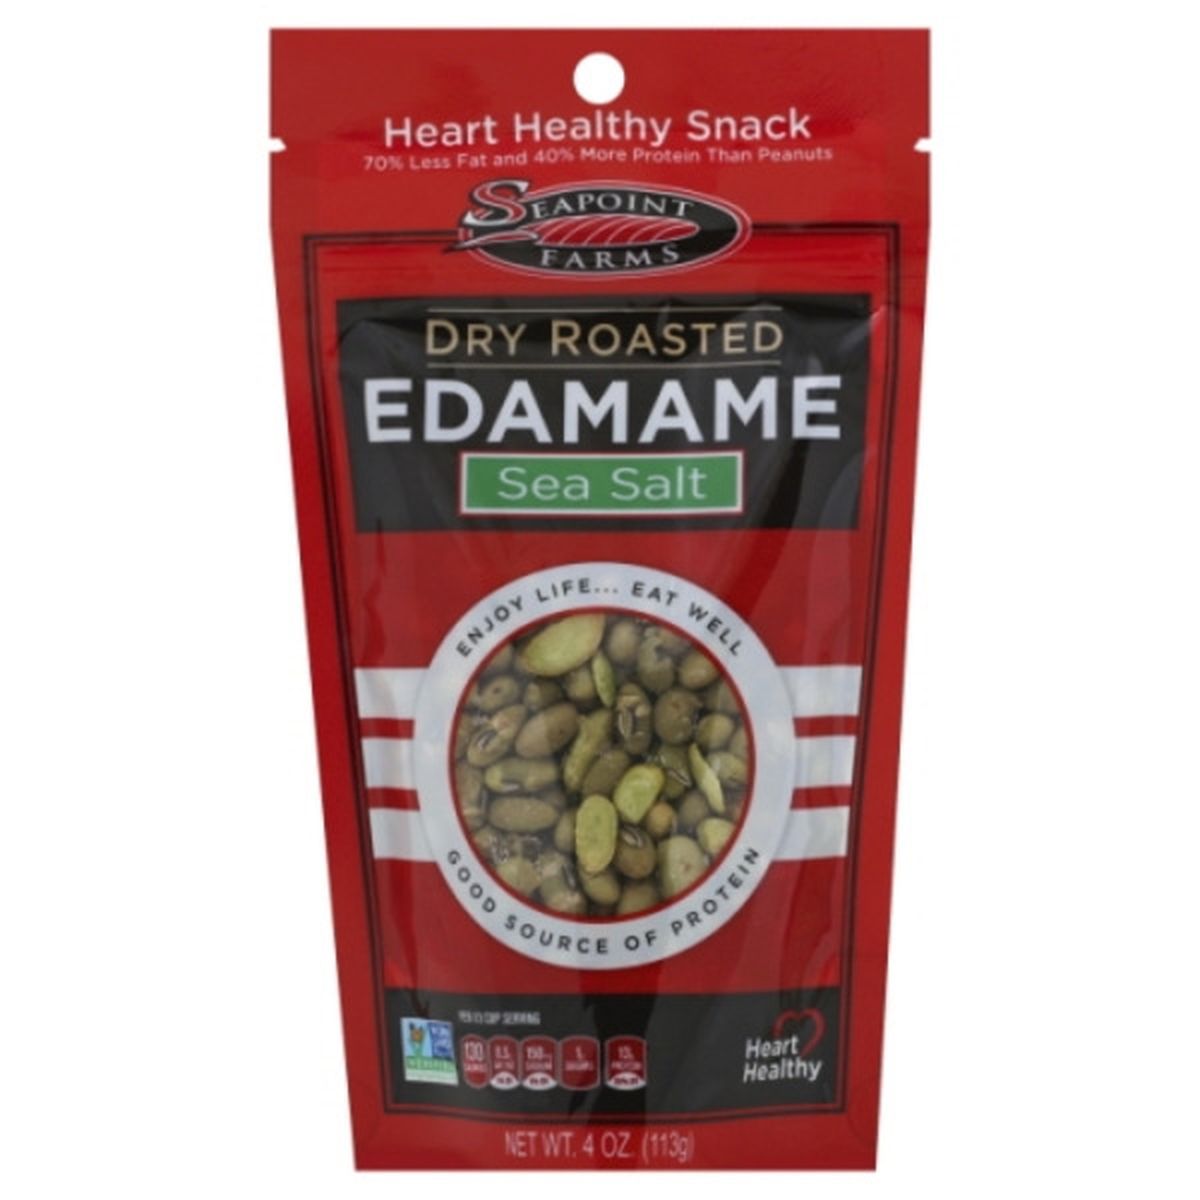 Calories in Seapoint Farms Edamame, Sea Salt, Dry Roasted